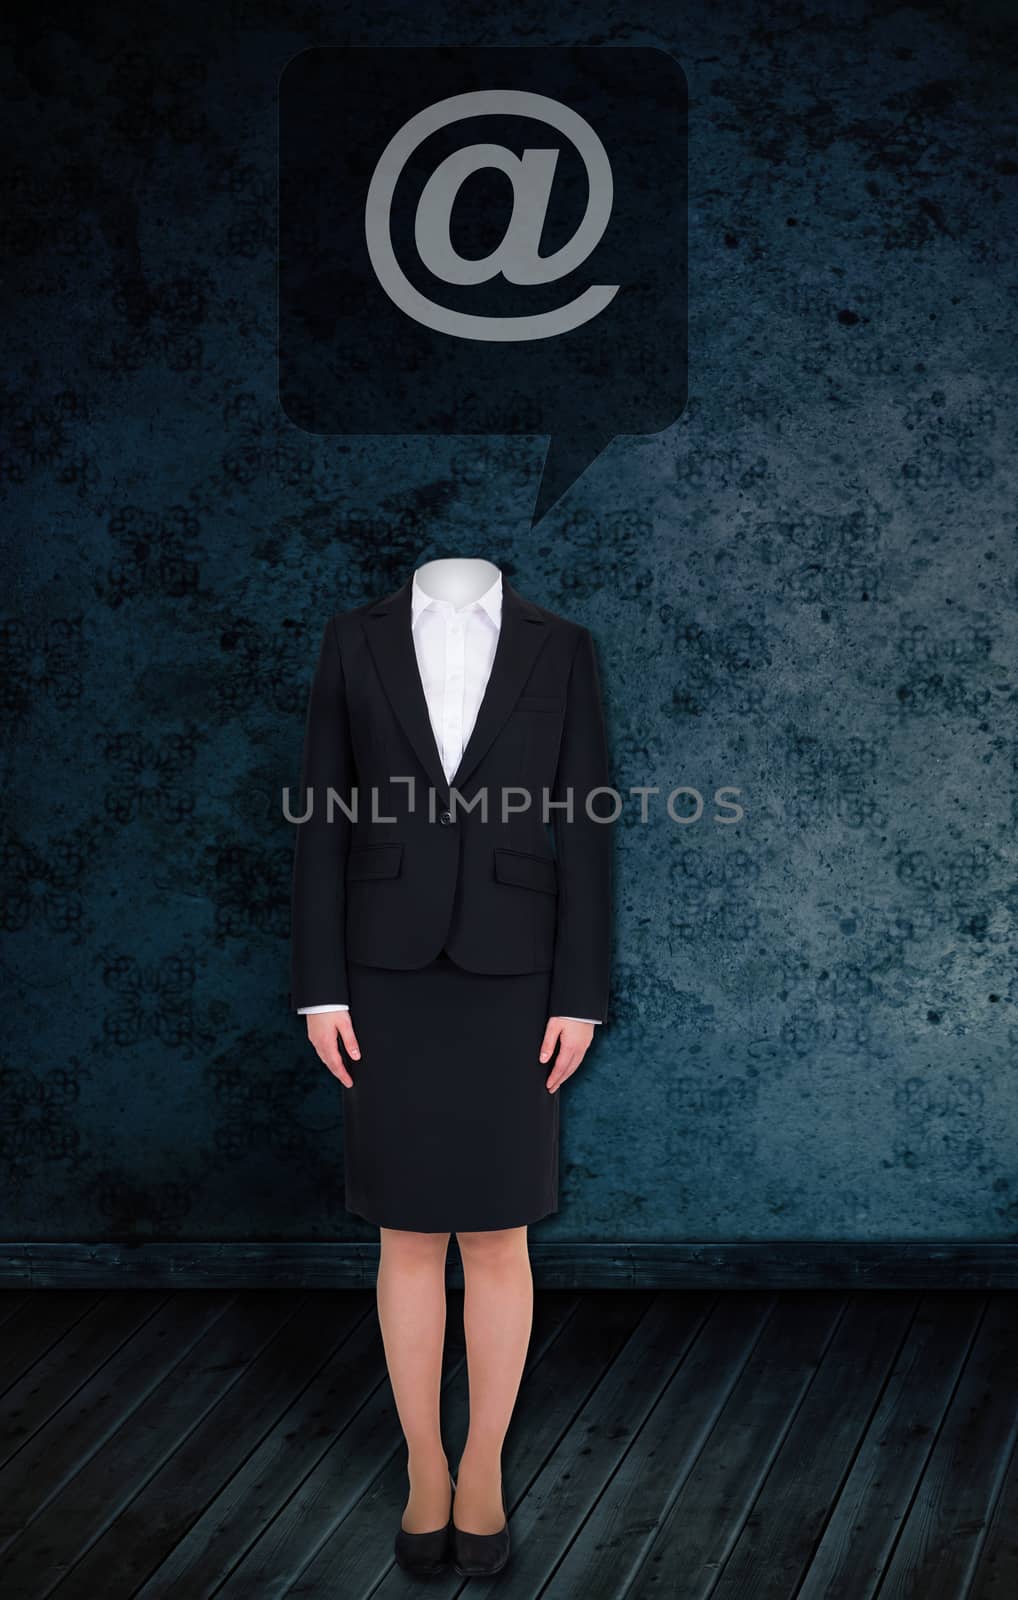 Composite image of headless businesswoman with at sign against dark grimy room